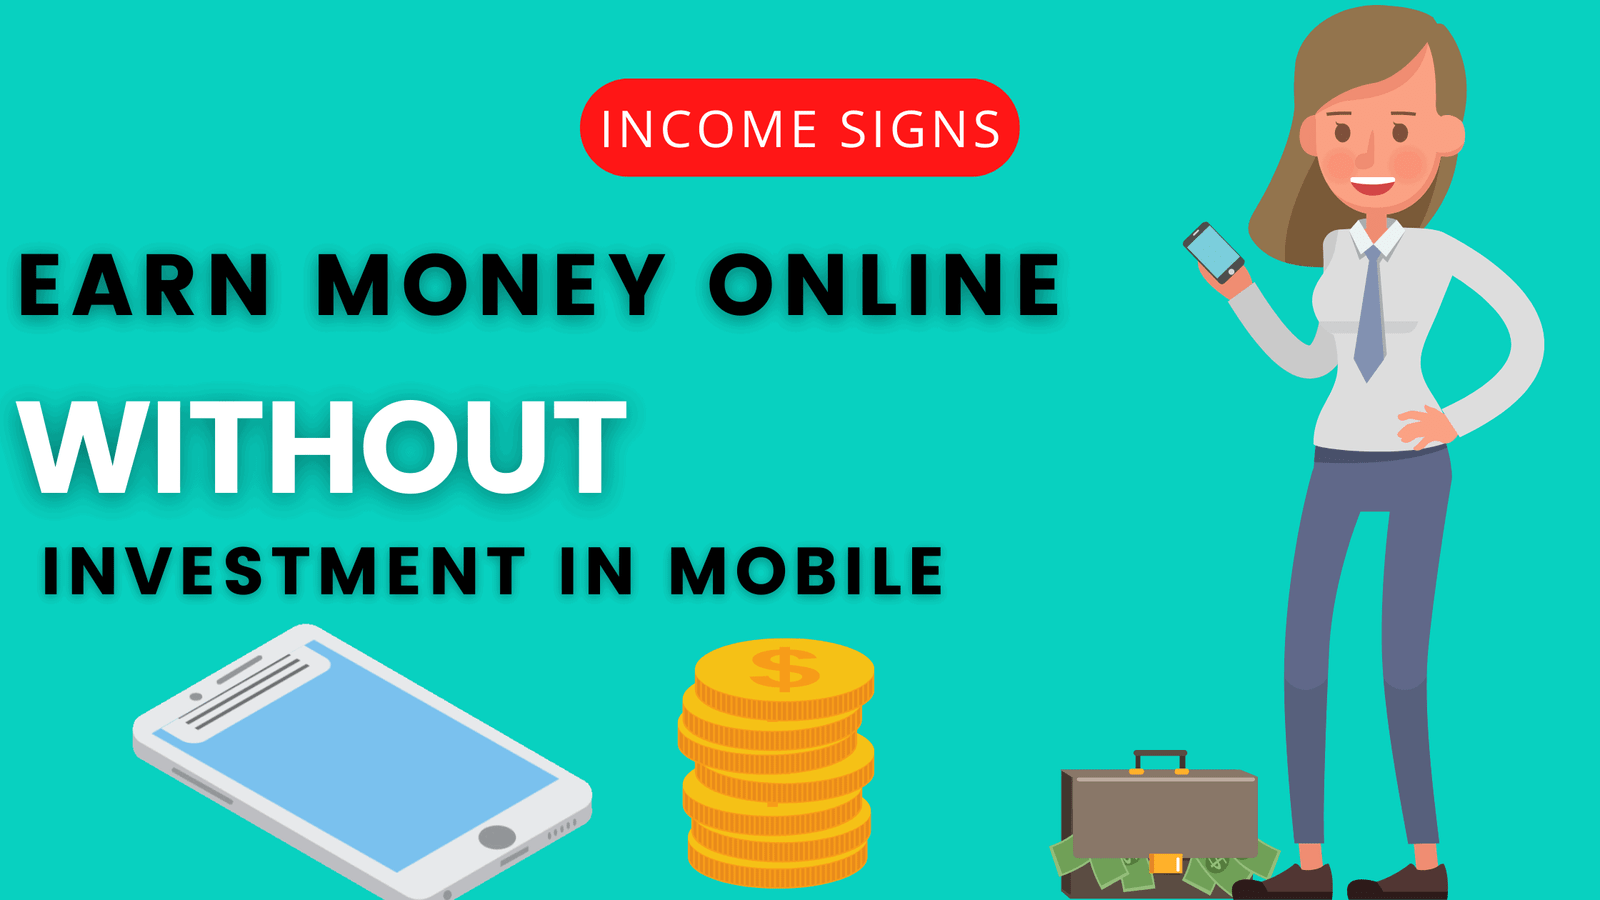 6 Best Ways to Earn Money Online Without Investment in Mobile